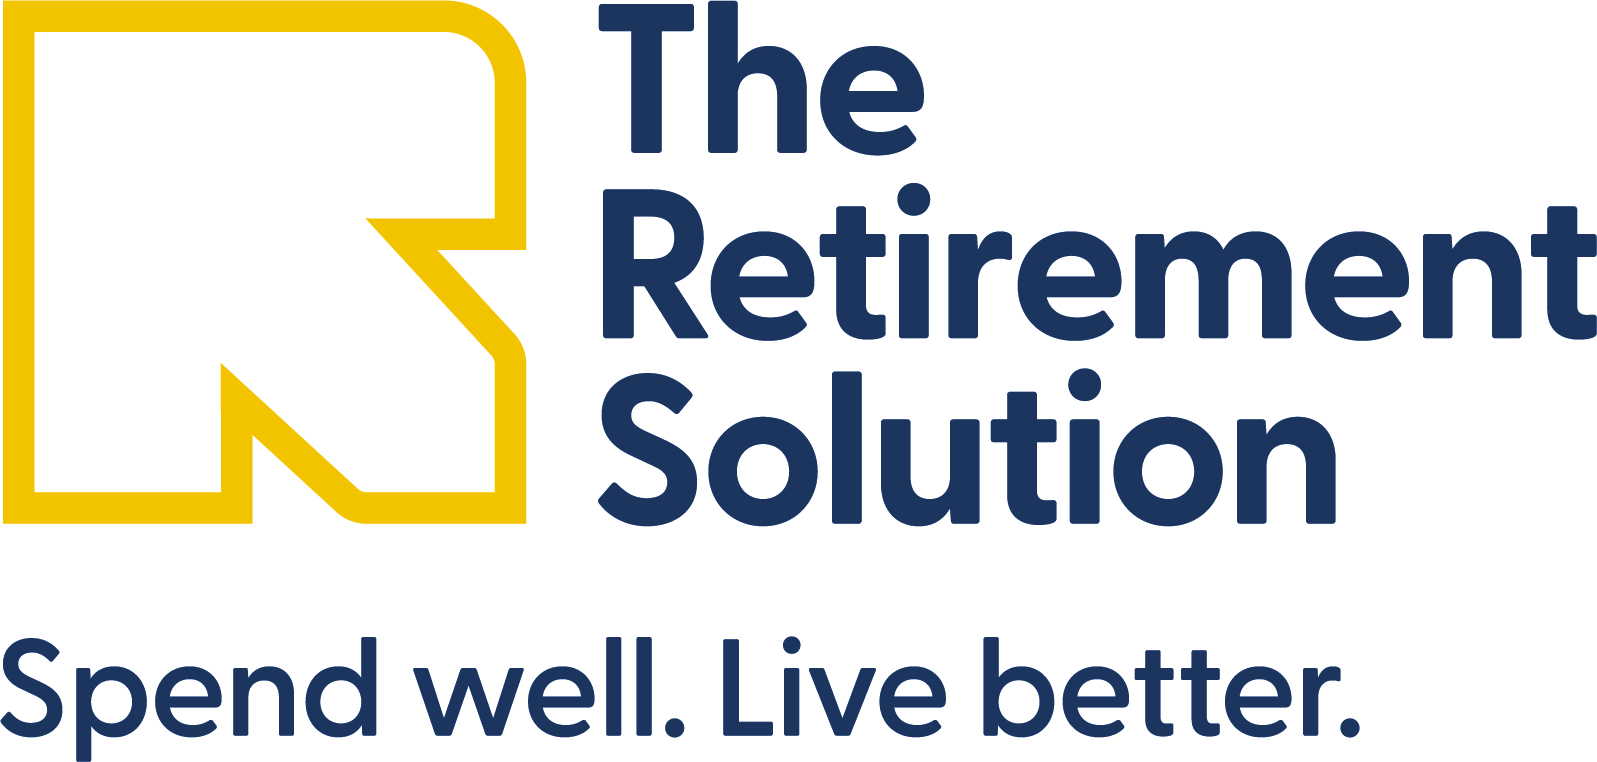 The Retirement Solution logo. Spend well. Live better.